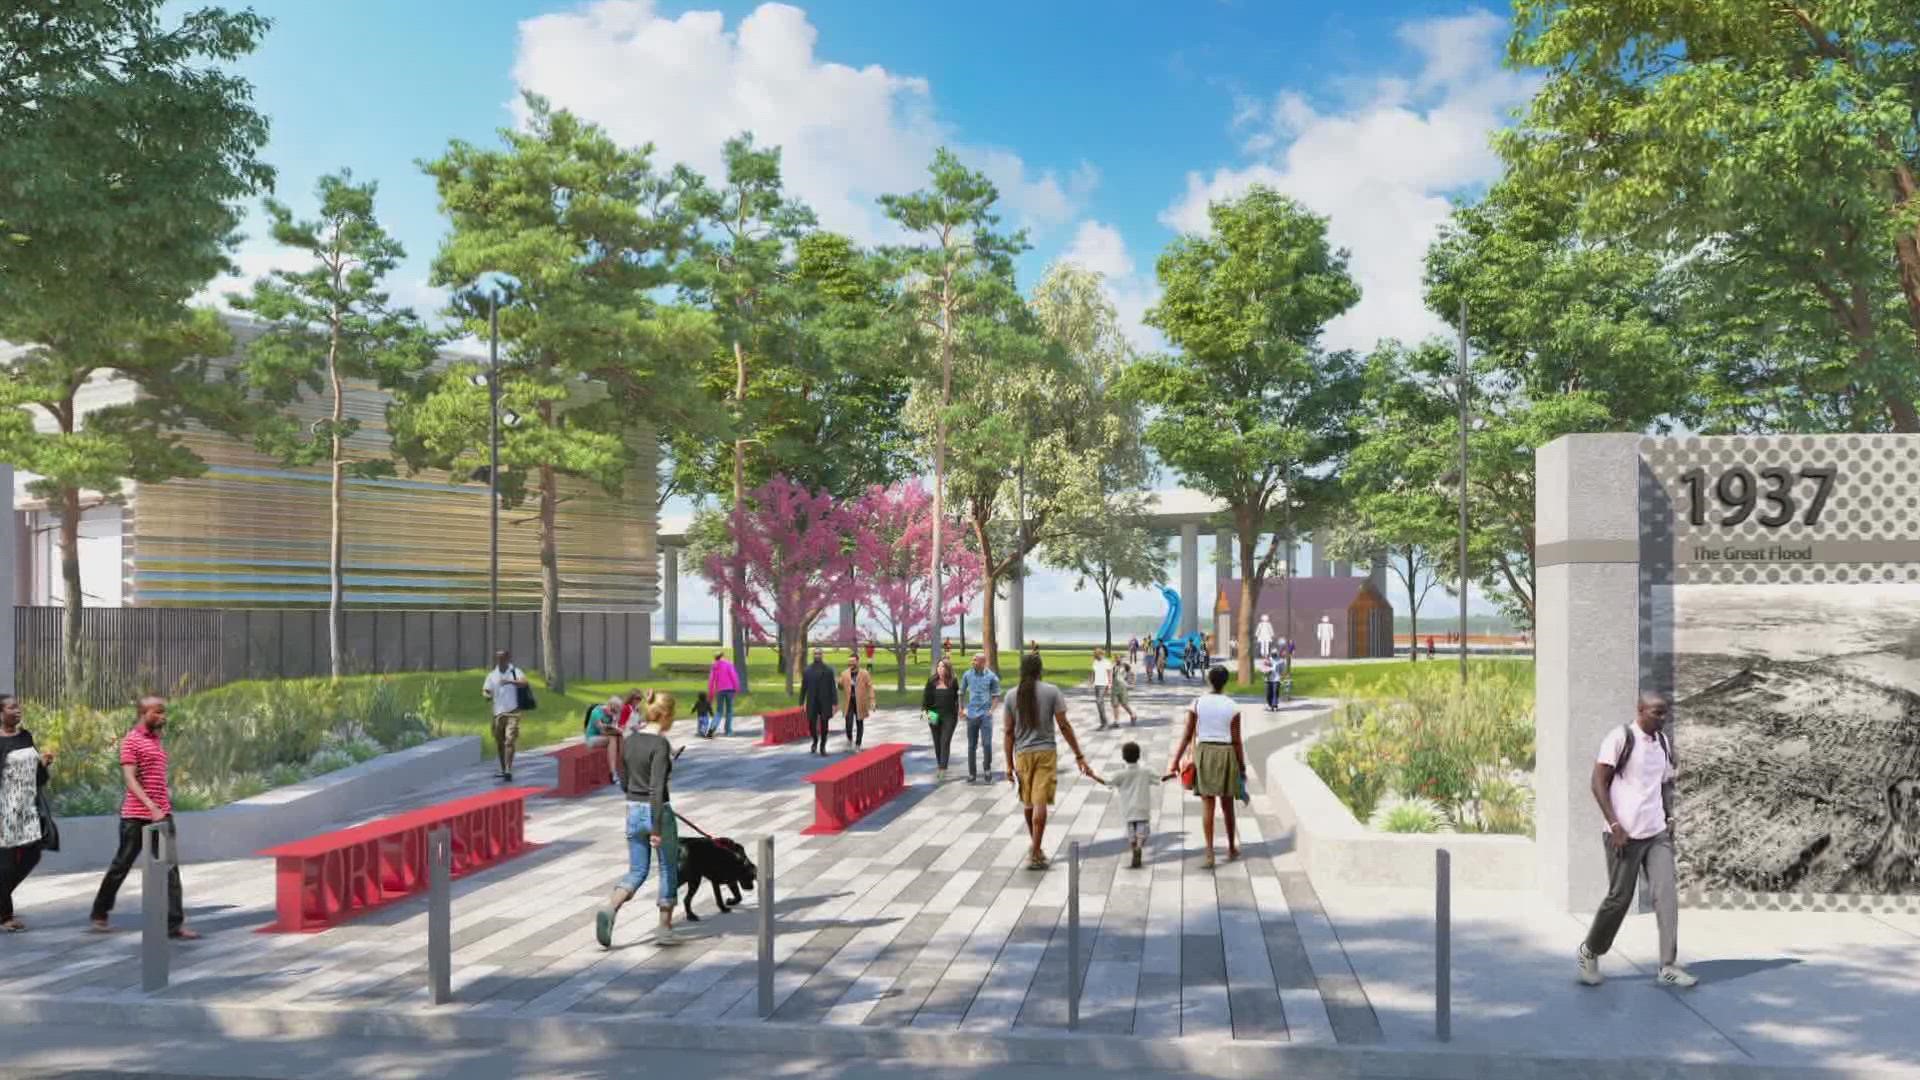 Gov. Andy Beshear said every Kentucky family deserves access to outdoor spaces like Louisville’s Waterfront Park and that’s why the state is investing $10 million.